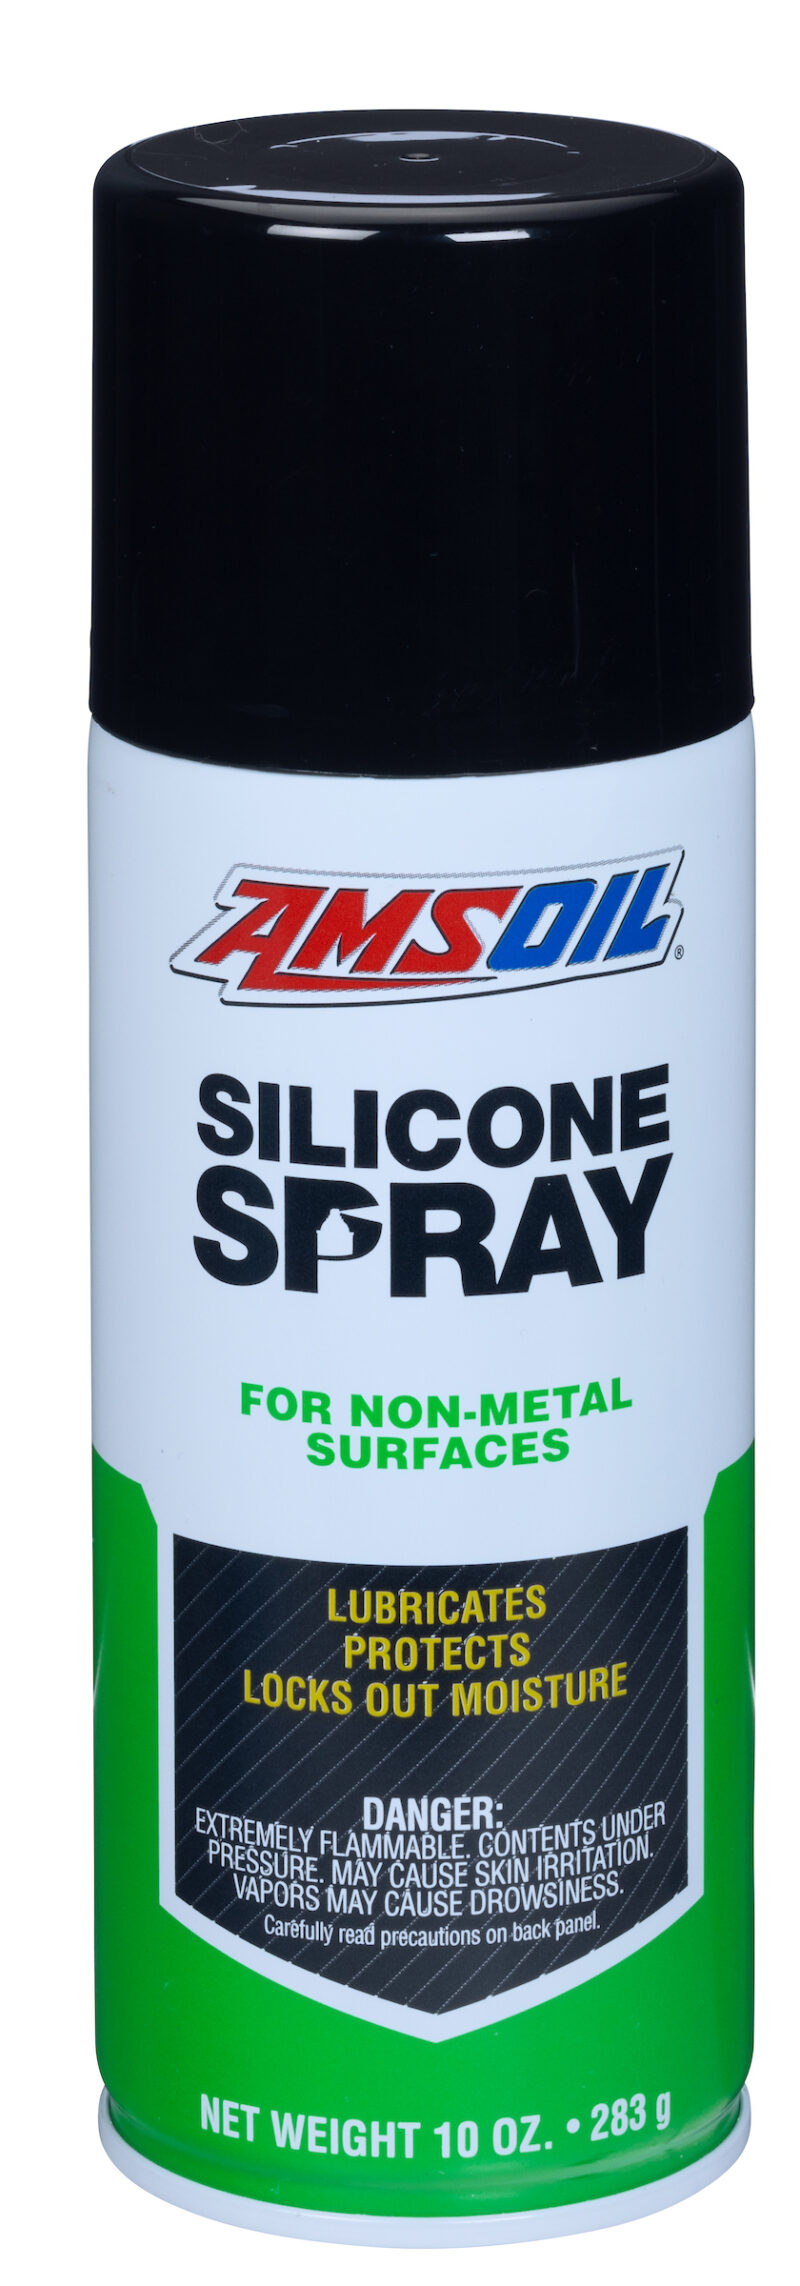 AMSOIL Silicone Spray - For Non-Metal Surfaces